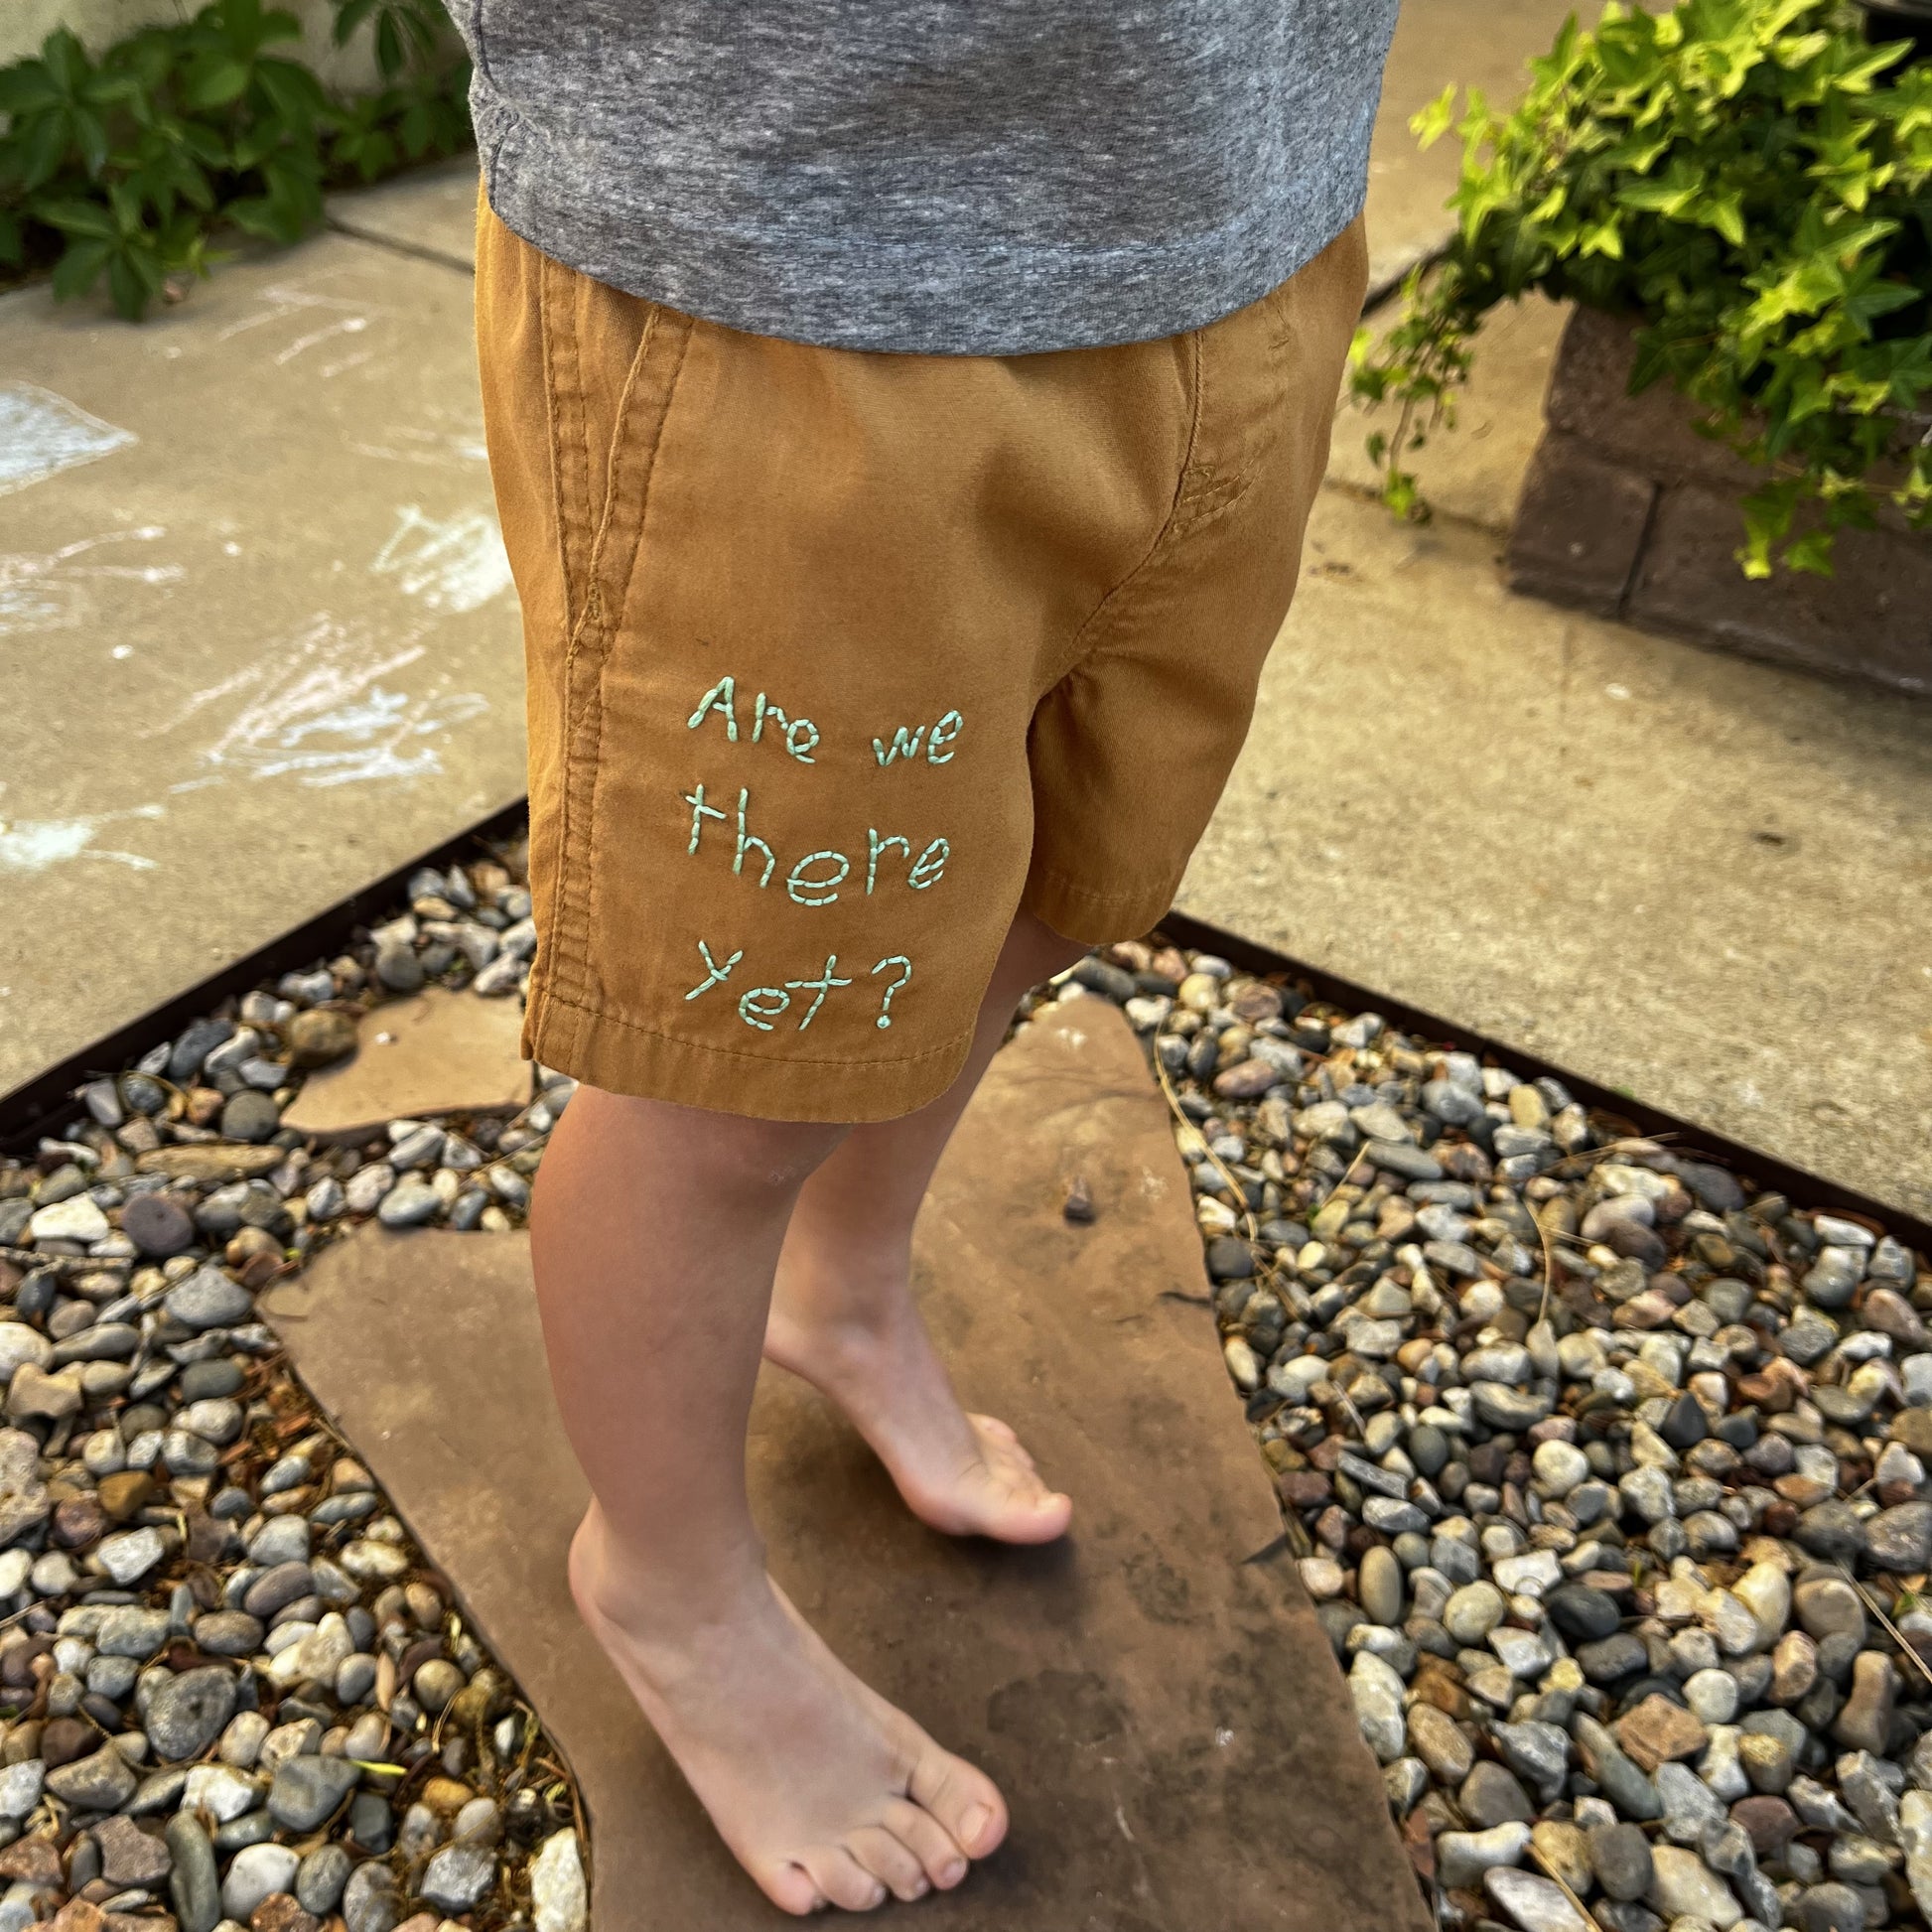 camel colored shorts on a toddler aged child, with the words "are we there yet?" hand embroidered on the lower right leg in green, the child is standing on a flagstone paver in rocks next to a sidewalk